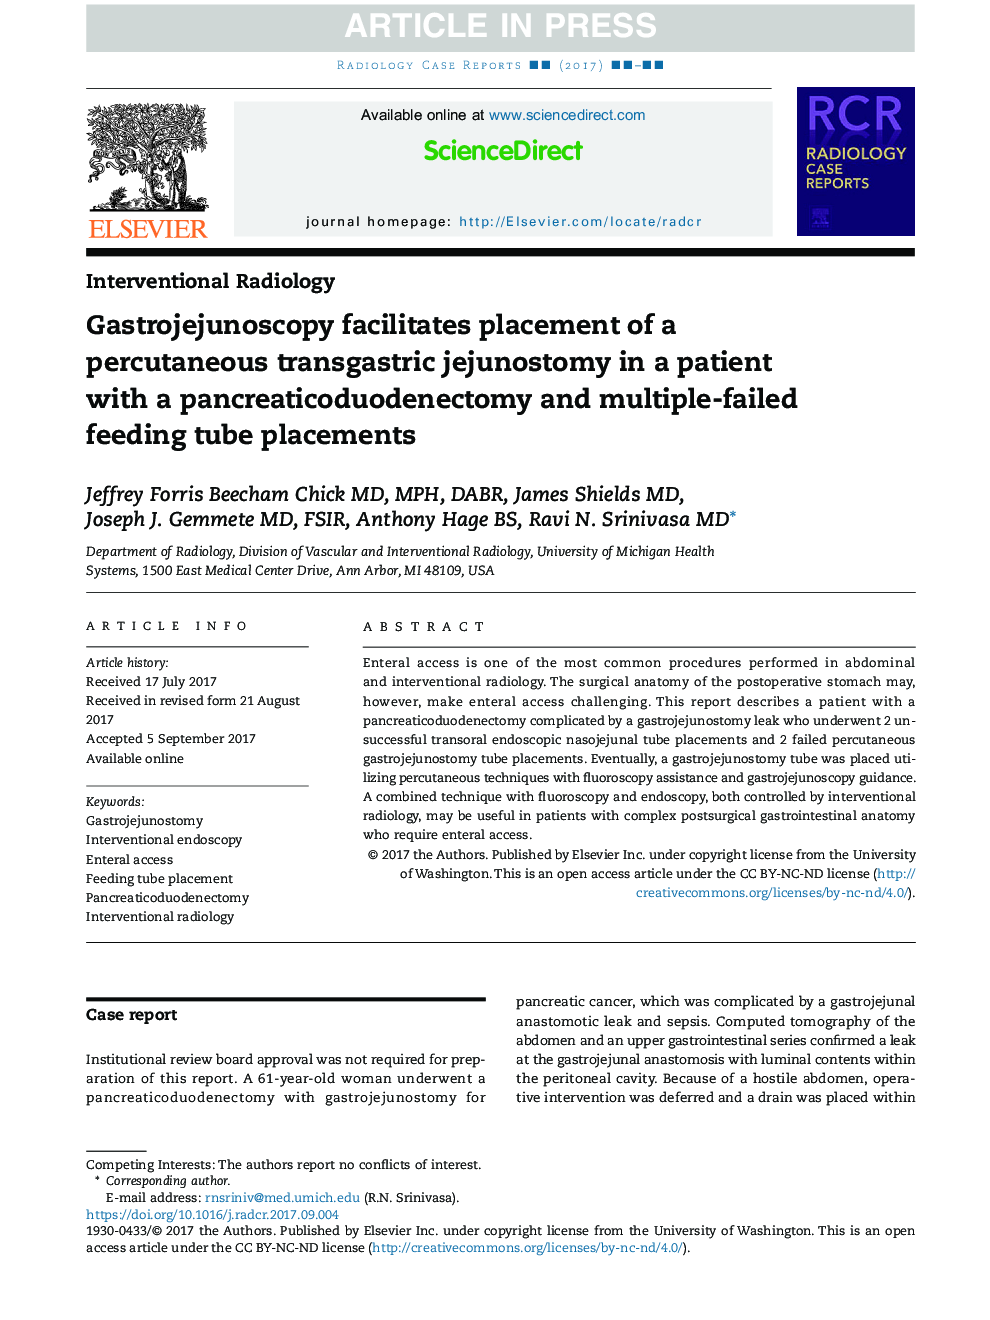 Gastrojejunoscopy facilitates placement of a percutaneous transgastric jejunostomy in a patient with a pancreaticoduodenectomy and multiple-failed feeding tube placements